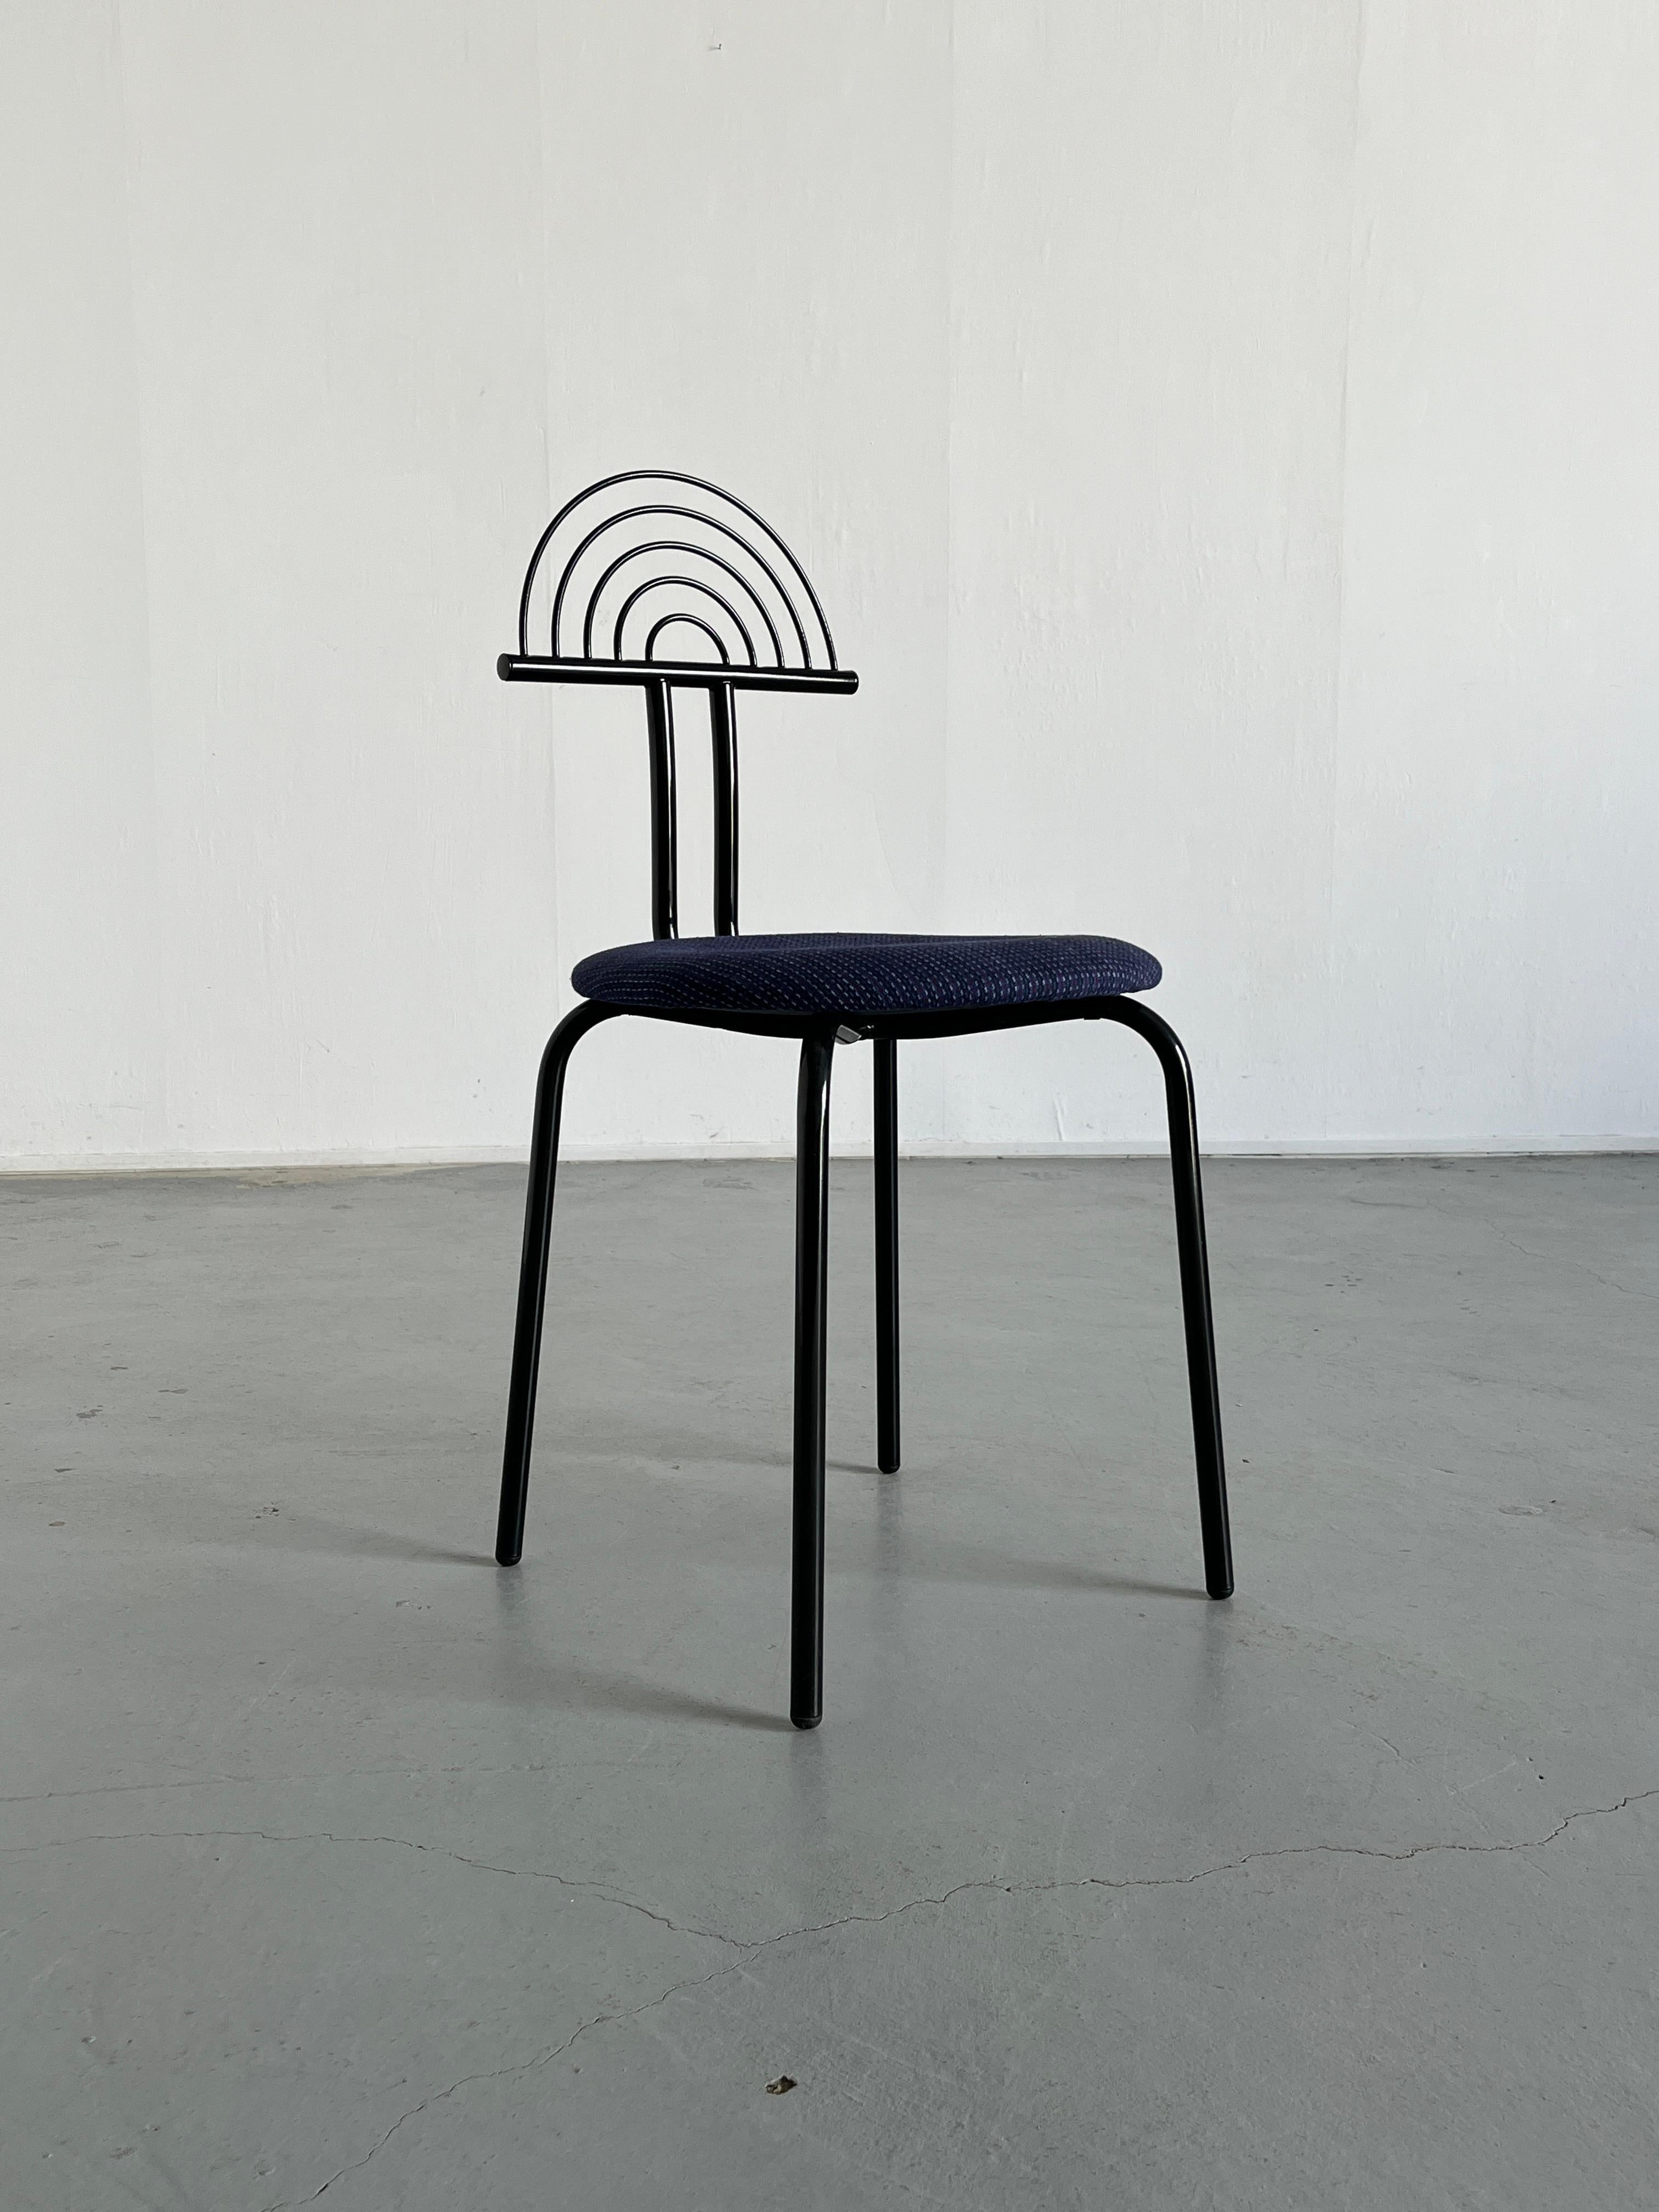 A unique vintage postmodern Memphis era dining chair or accent chair, made from metal, with a crescent curved metal backrest and upholstered in a postmodern purple-blue striped upholstery.

Excellent vintage condition with minimal expected signs of